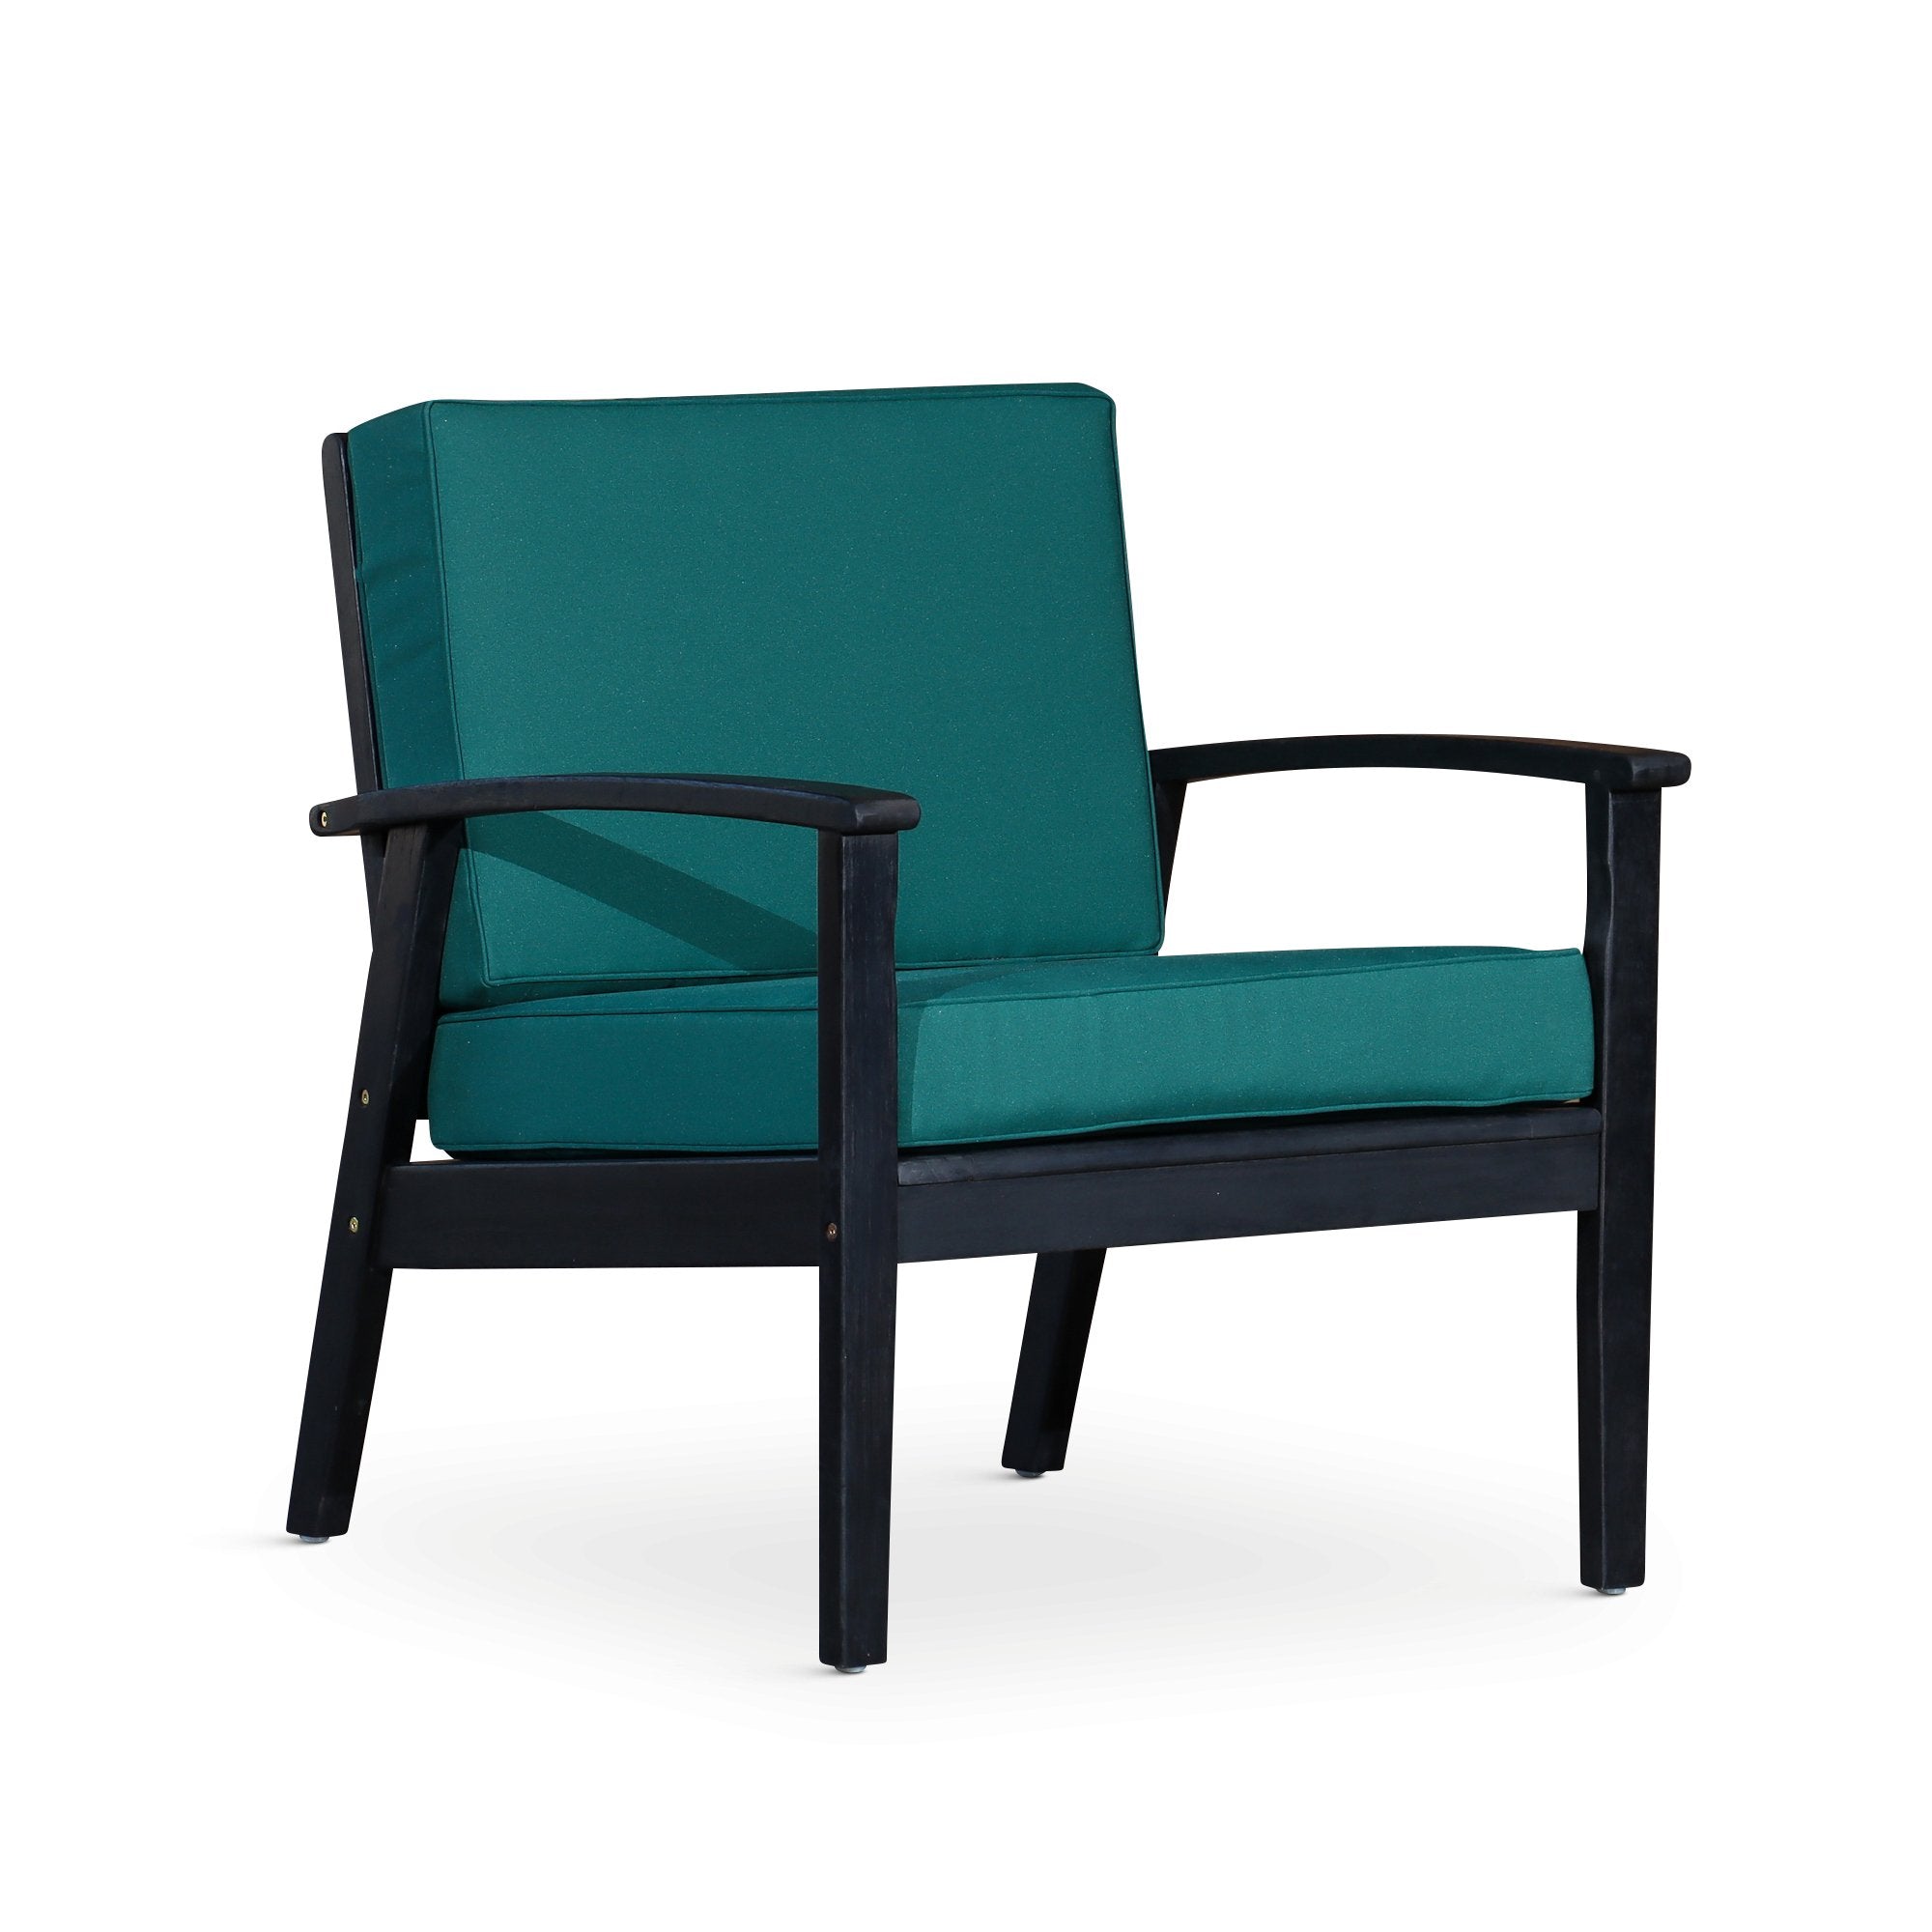 Deep-Seat-Outdoor-Chair,-Espresso-Finish,-Dark-Green-Cushions-Outdoor-Chairs